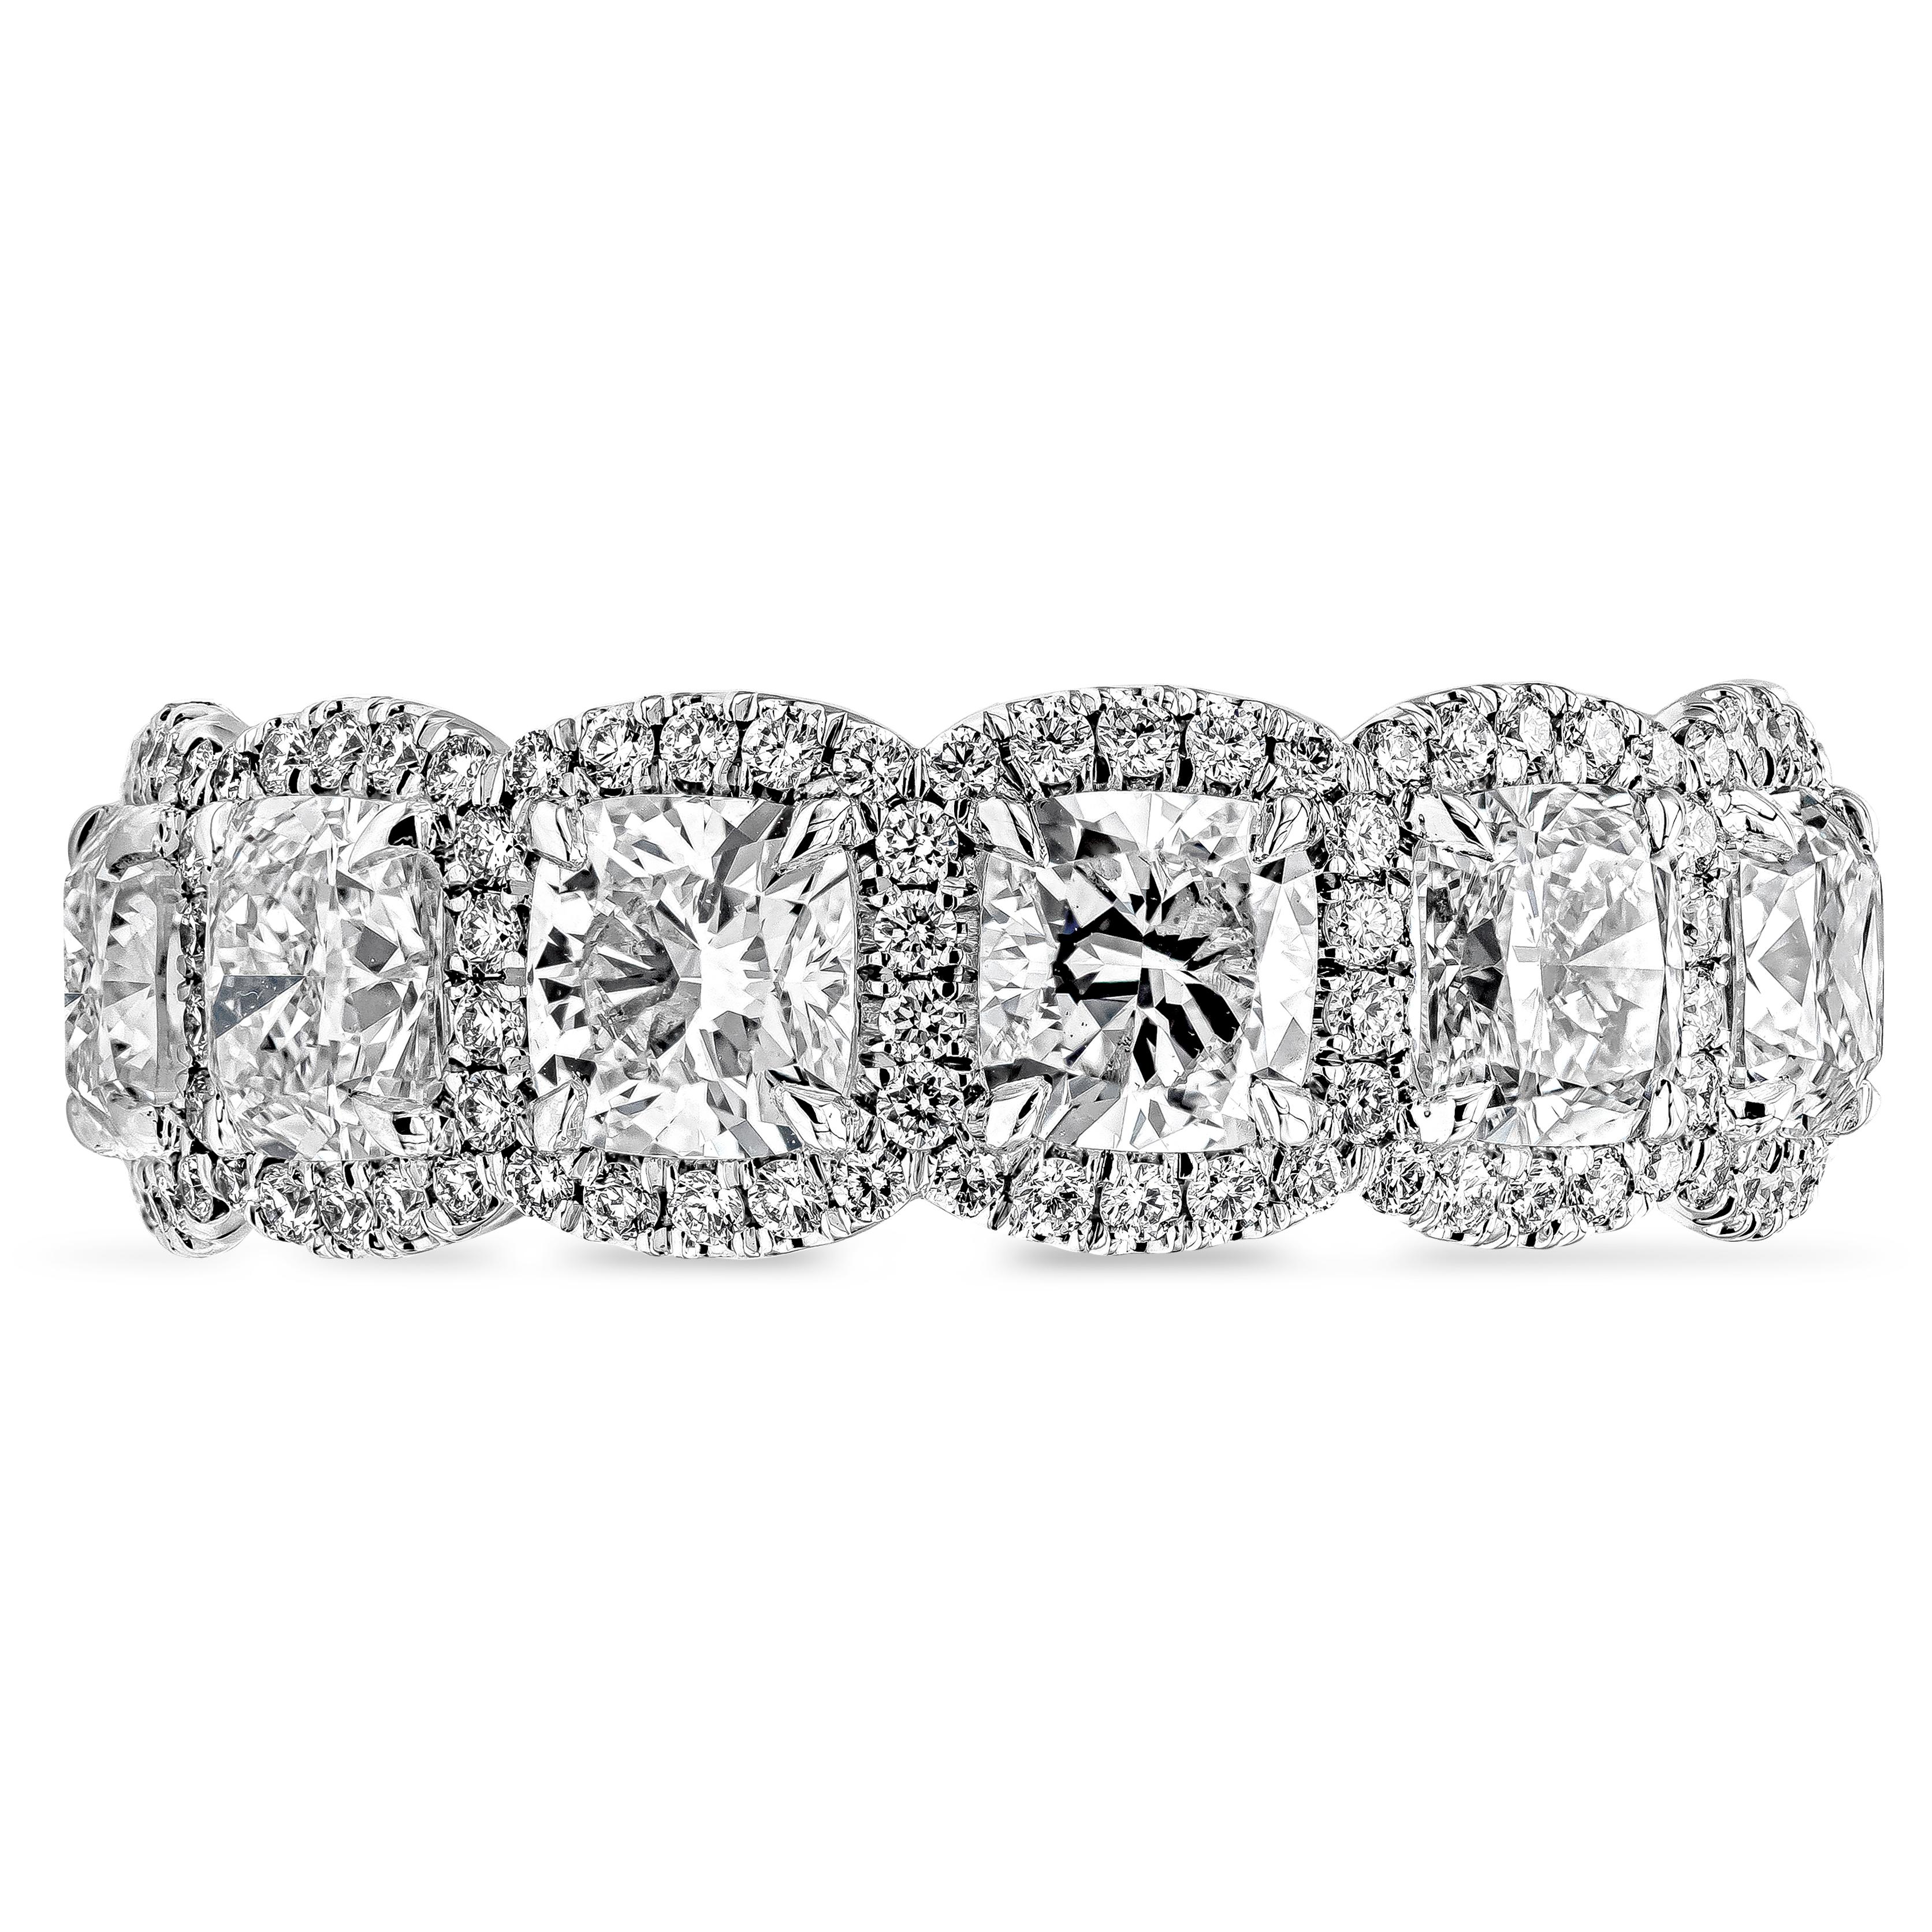 An intricately designed wedding band style, showcasing a row of GIA certified cushion cut diamonds of E-F color and VS-VVS clarity. Each cushion cut diamond is surrounded by a single row of round brilliant cut diamonds weighing 0.70 carats total